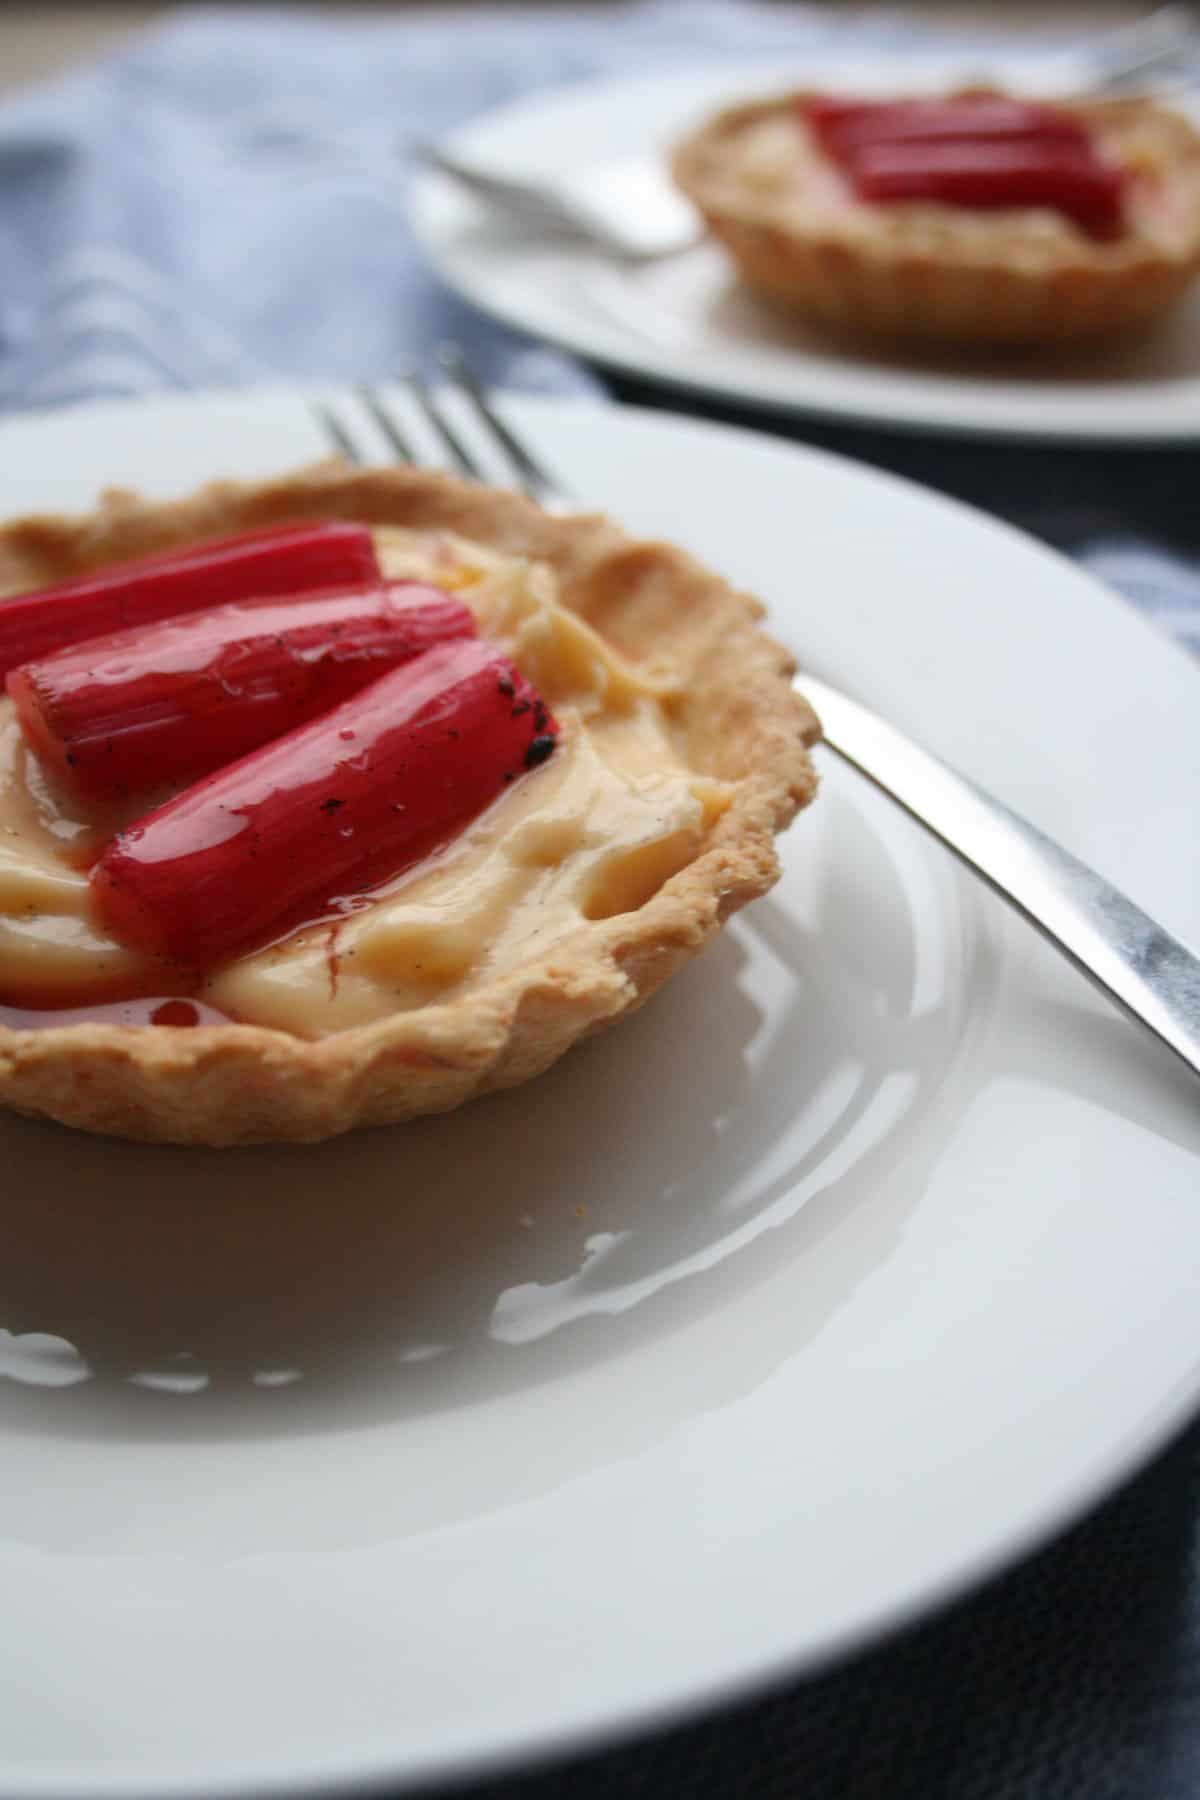 A plate with rhubarb and custard tart and fork.